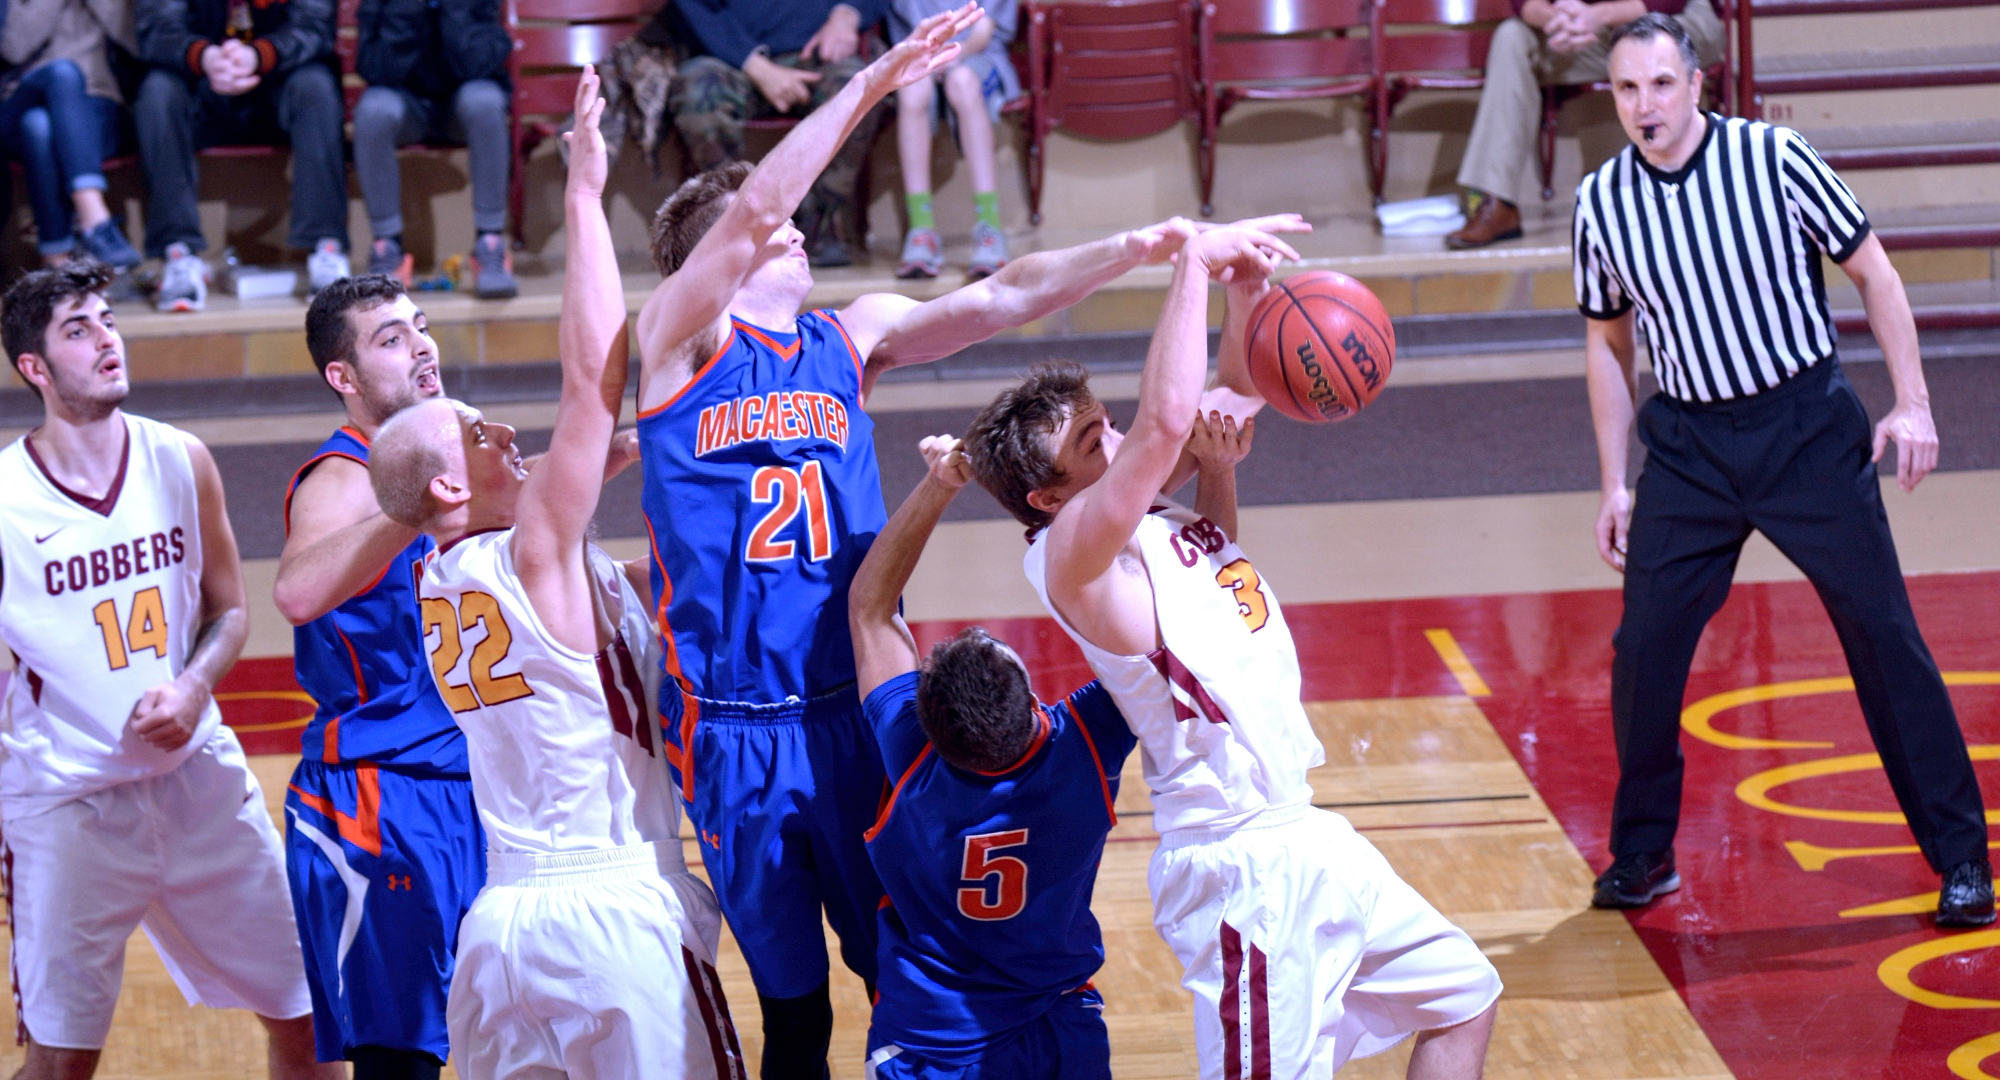 Senior Zach Kinny drives the lane during the Cobbers' game on Monday with Macalester. Kinny went 5-for-10 from the floor and finished with 16 points.